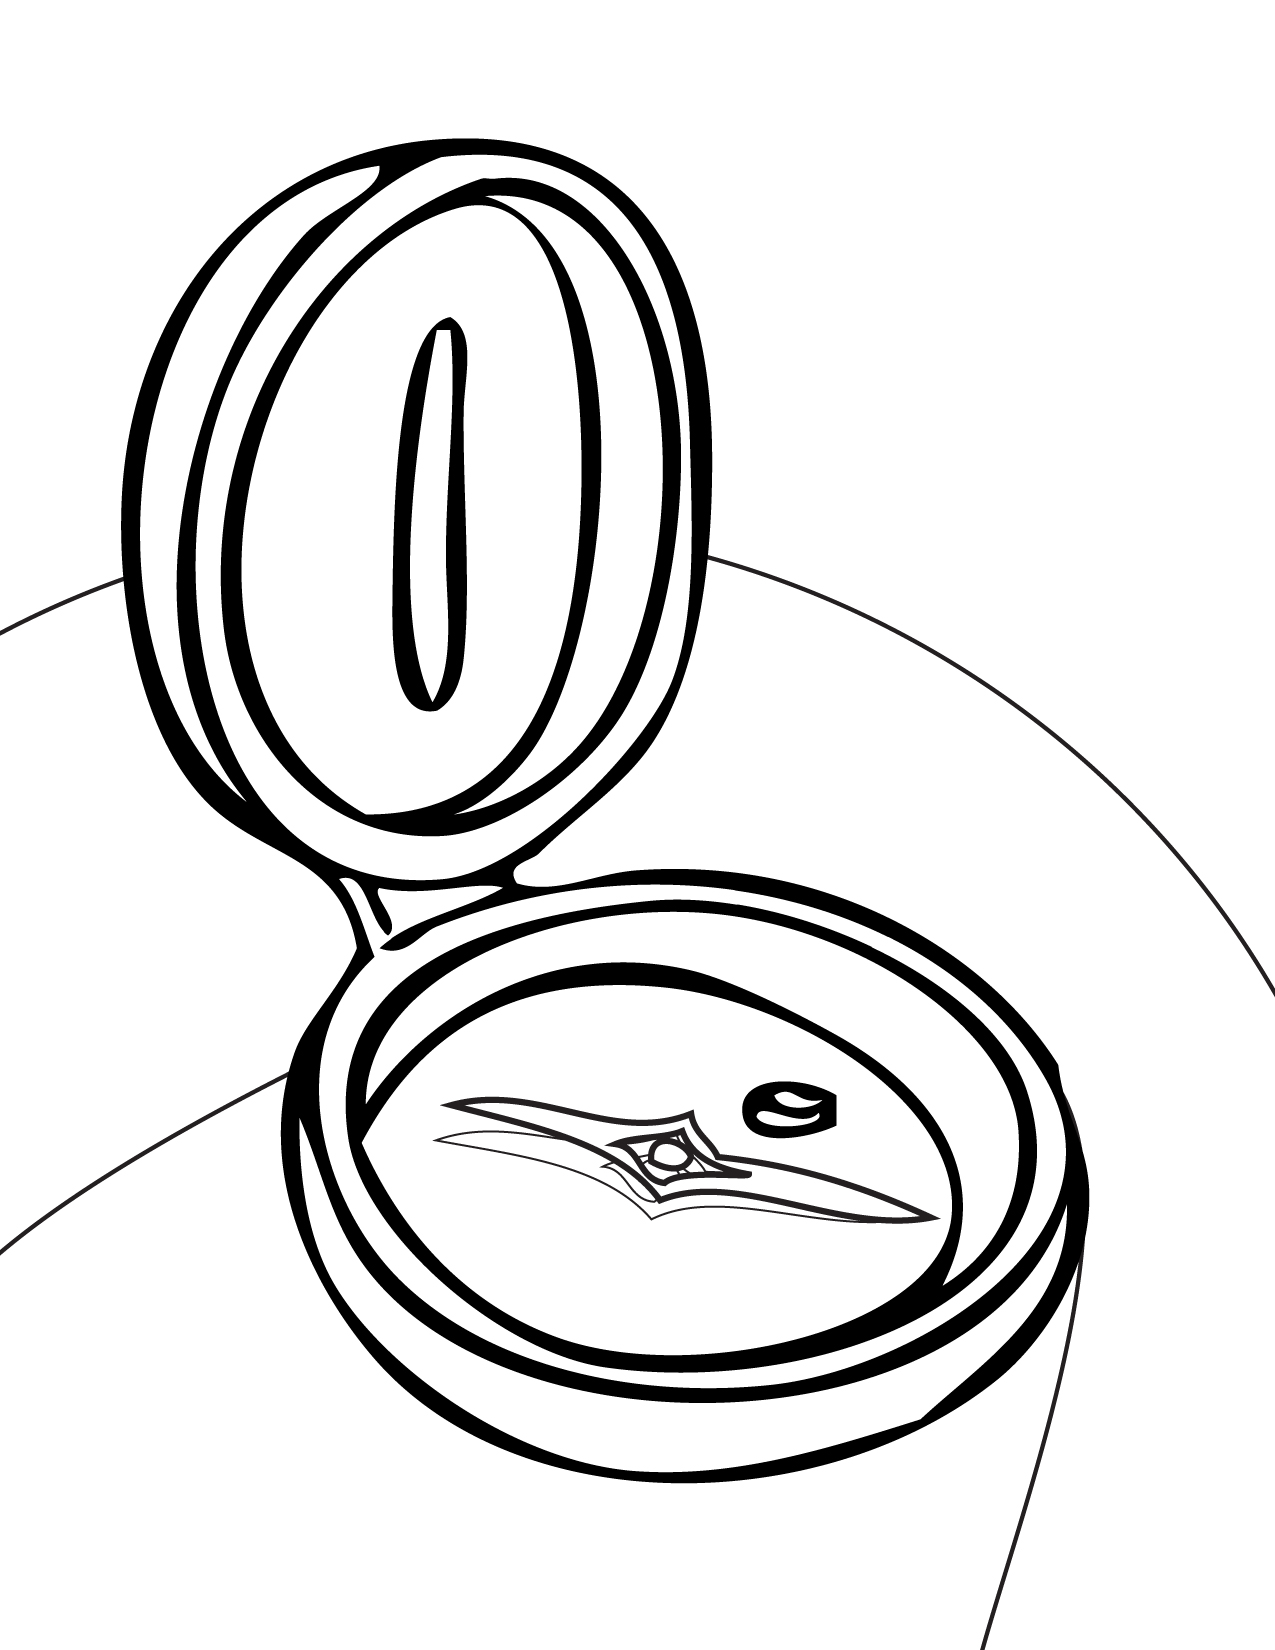 Compass Coloring Page - Handipoints